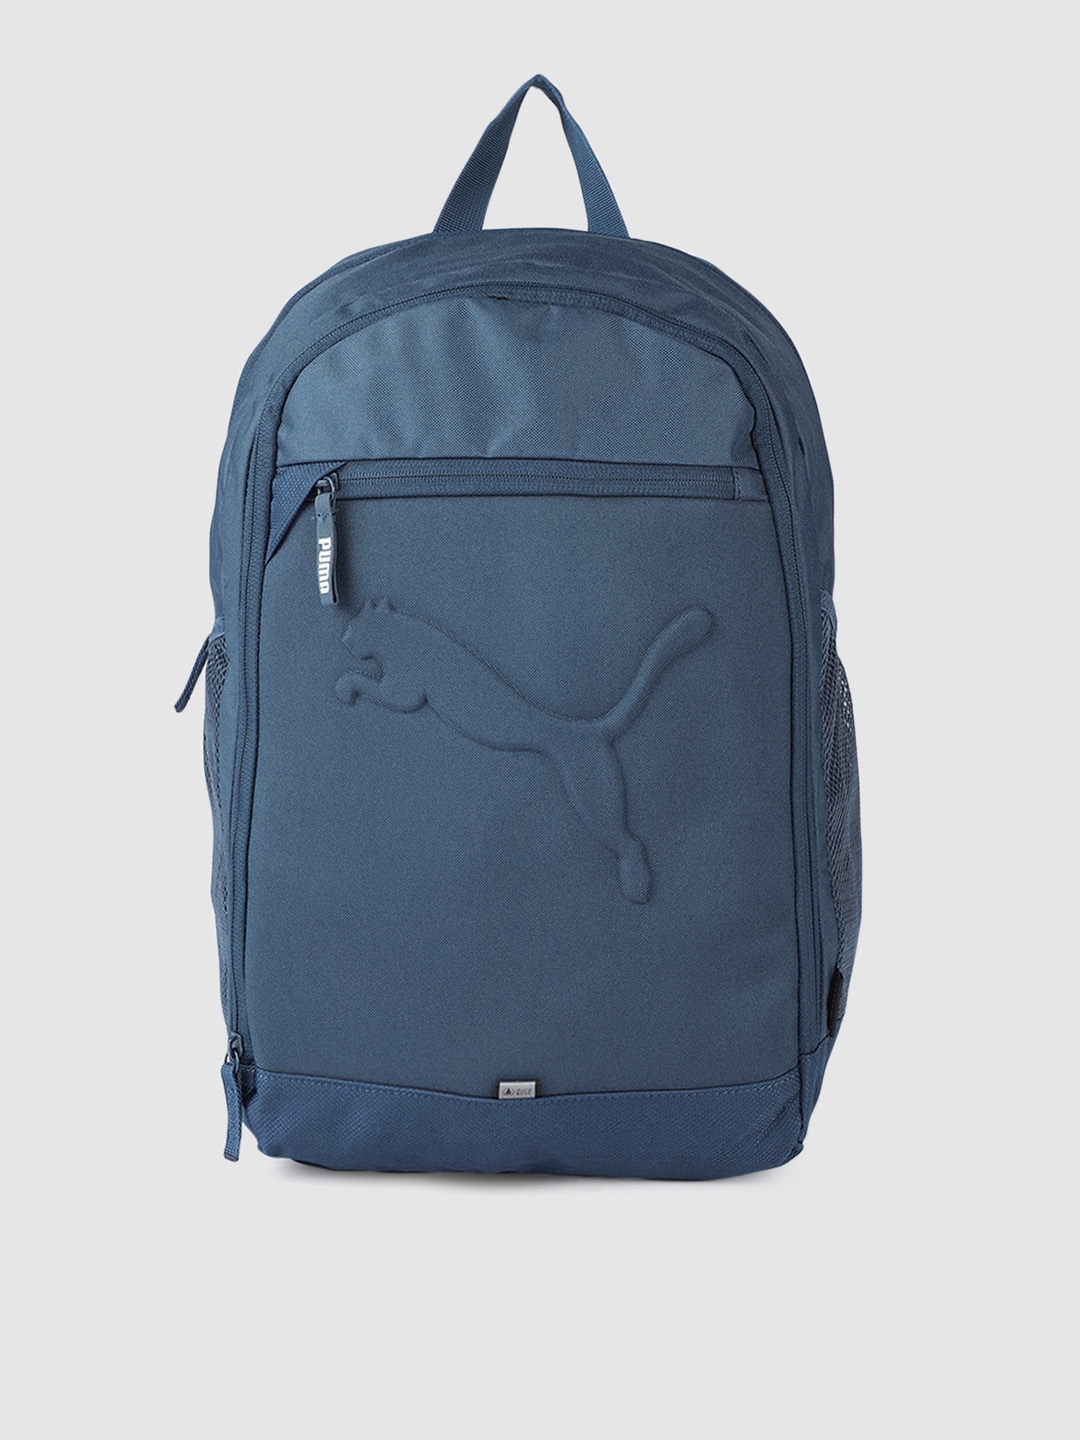 Puma Unisex Blue Solid Buzz Backpack